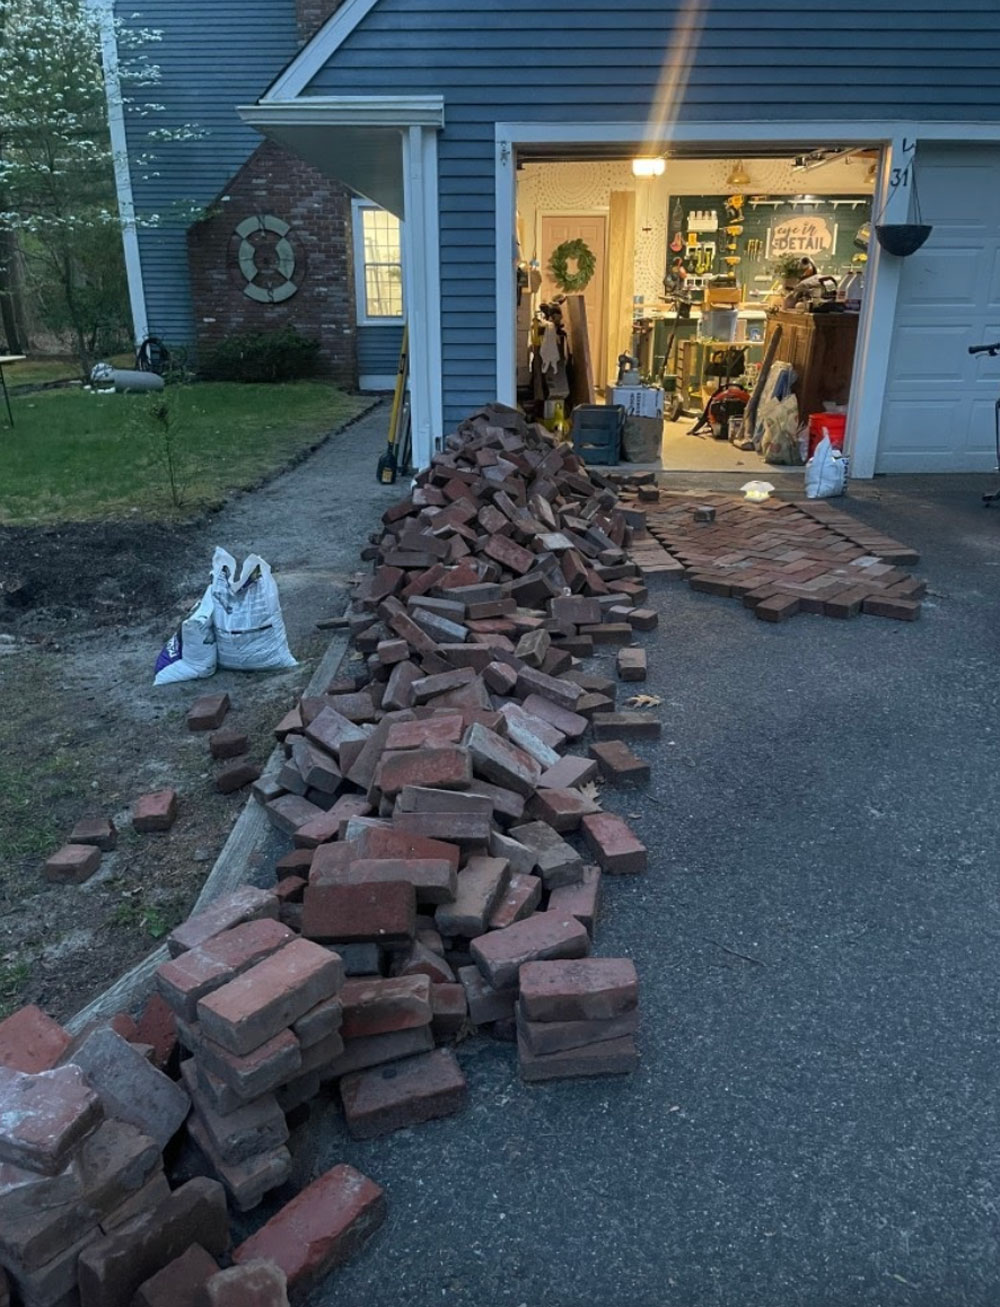 Driveway filled with a pile of bricks.